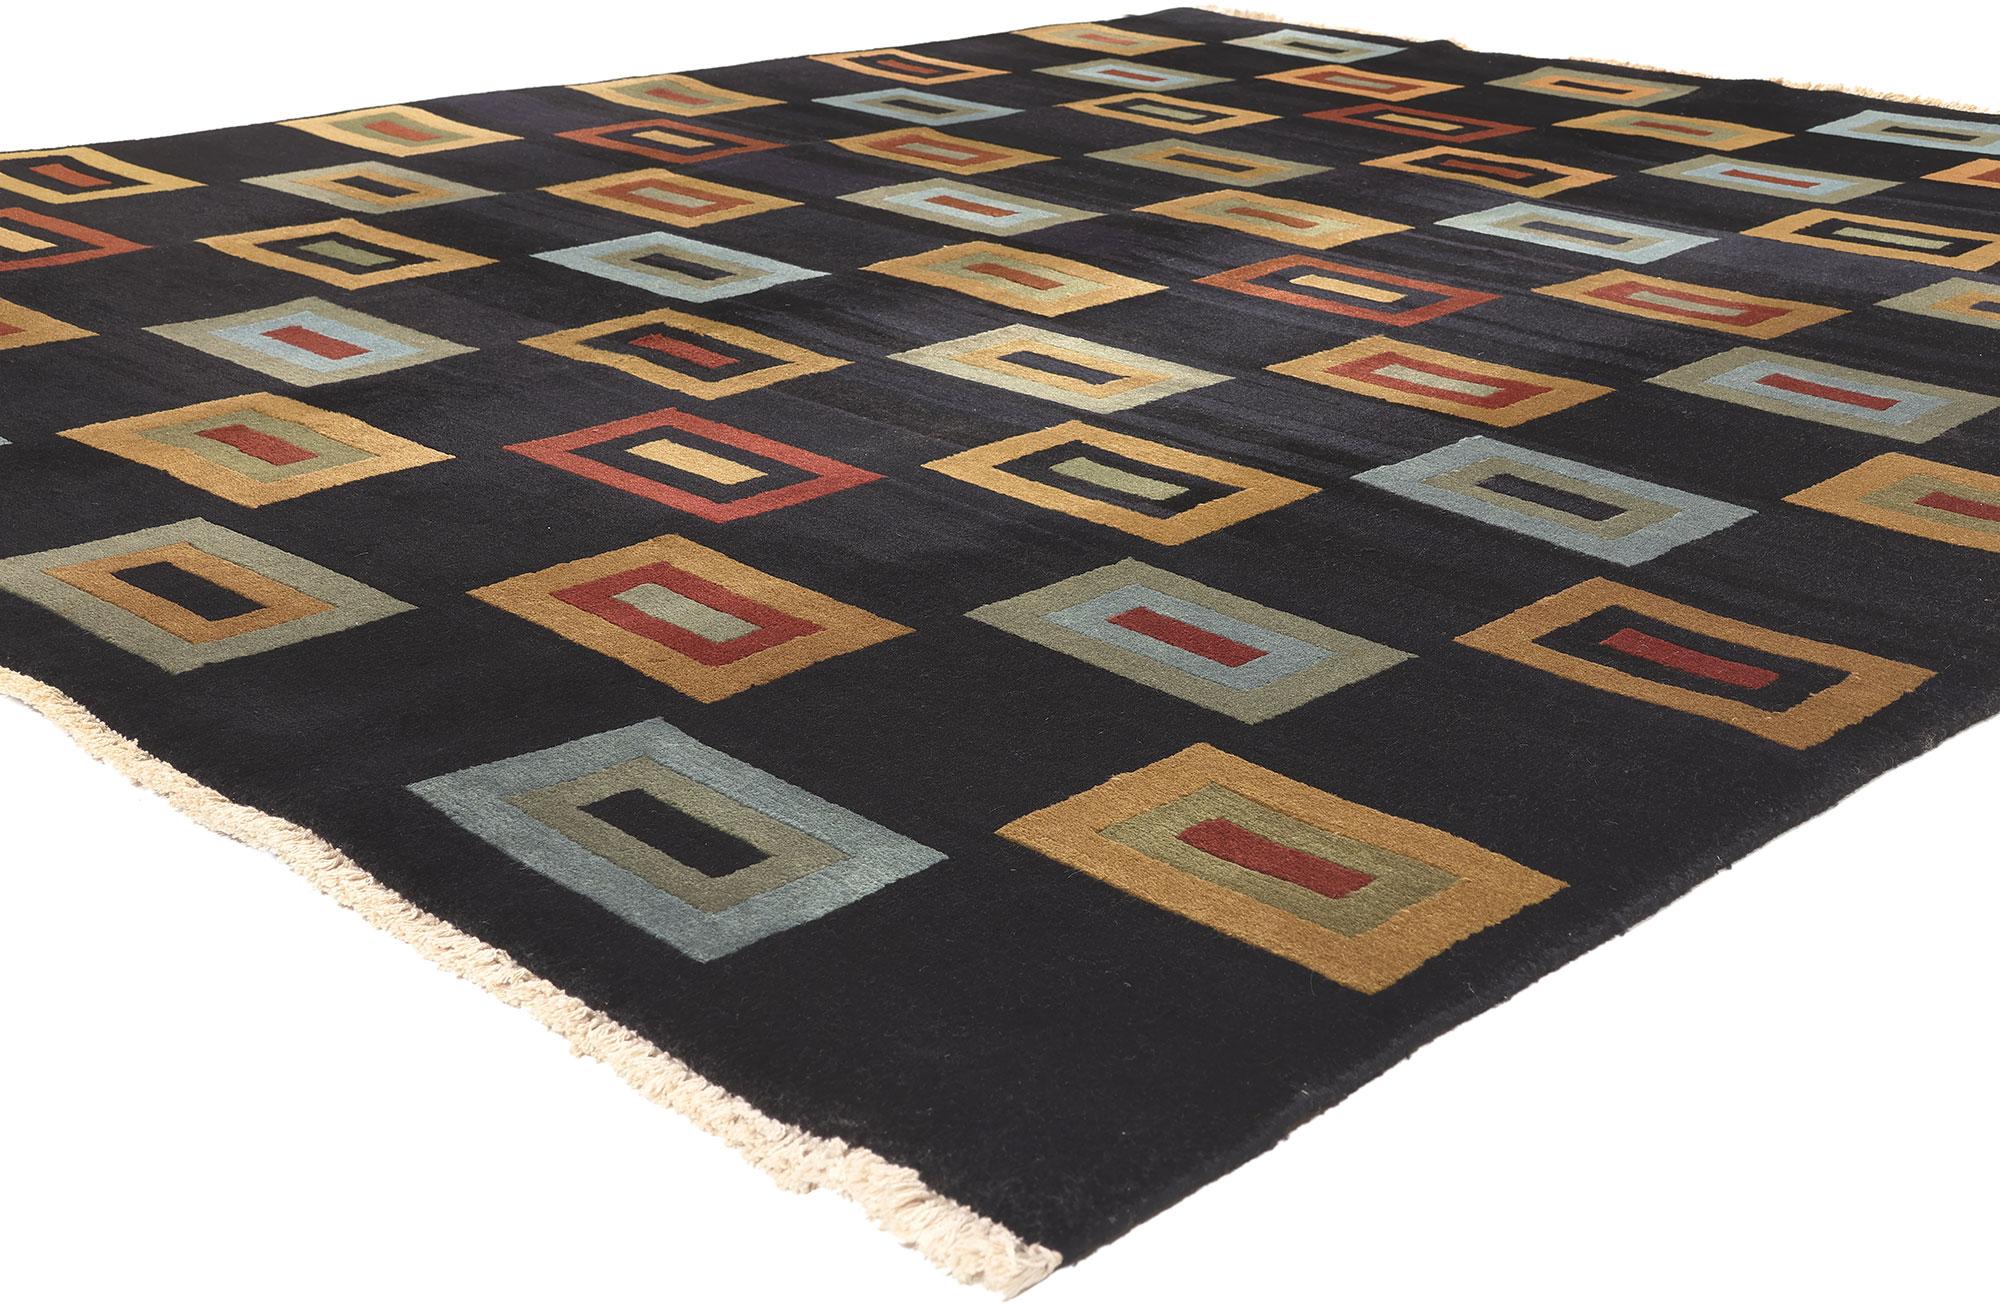 74889 Vintage Tibetan Rug, 07'09 x 09'05. 
Cubism meets sublime simplicity in this vintage Tibetan rug. The cubist design and earthy colors woven into this piece work together creating a modern, elevated atmosphere. An allover pattern composed of